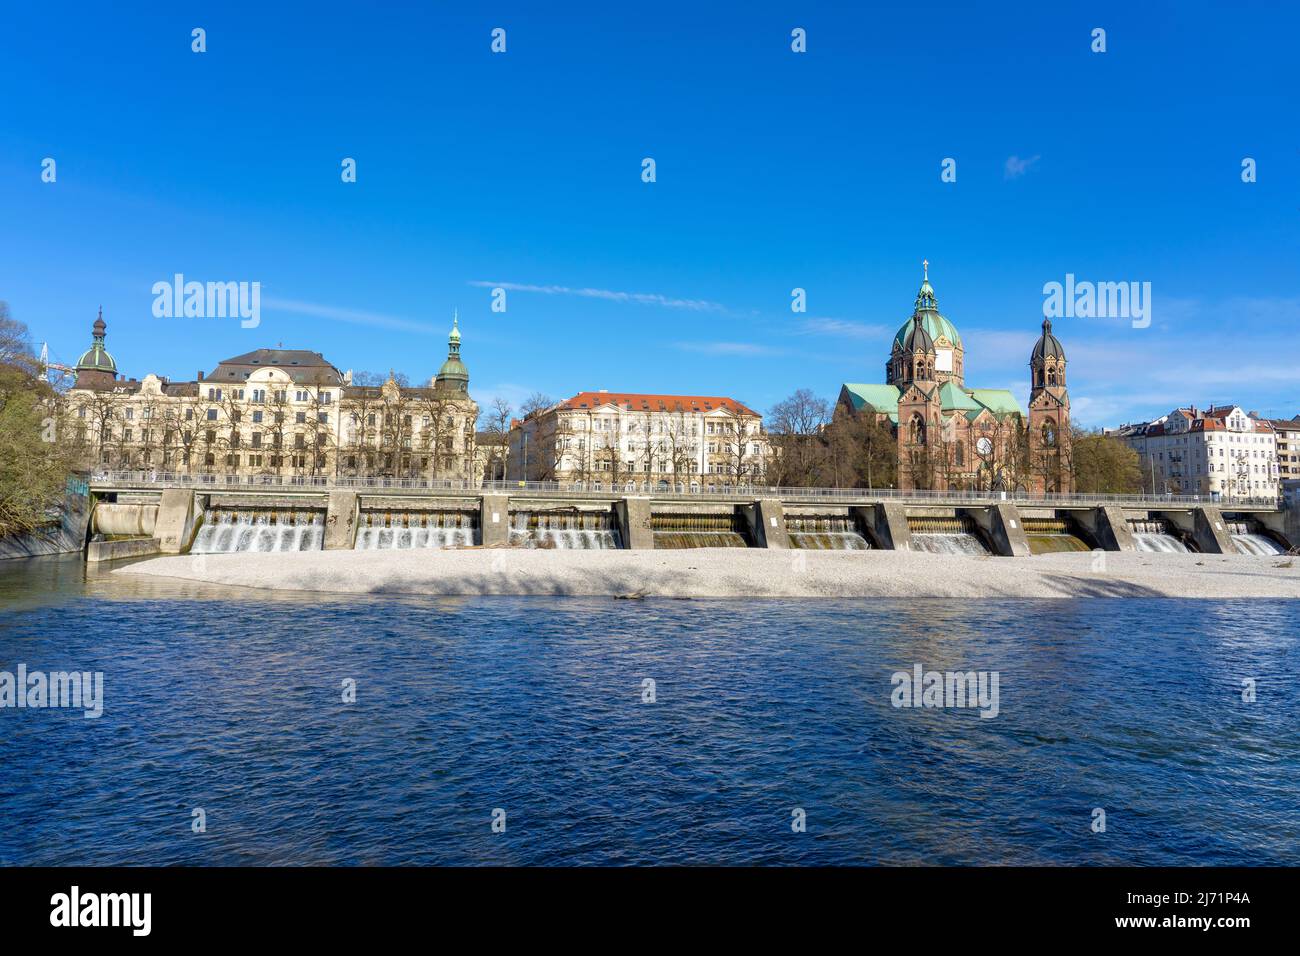 Isar river in Munich with saint Lukas dome cathedral and bridge Stock Photo